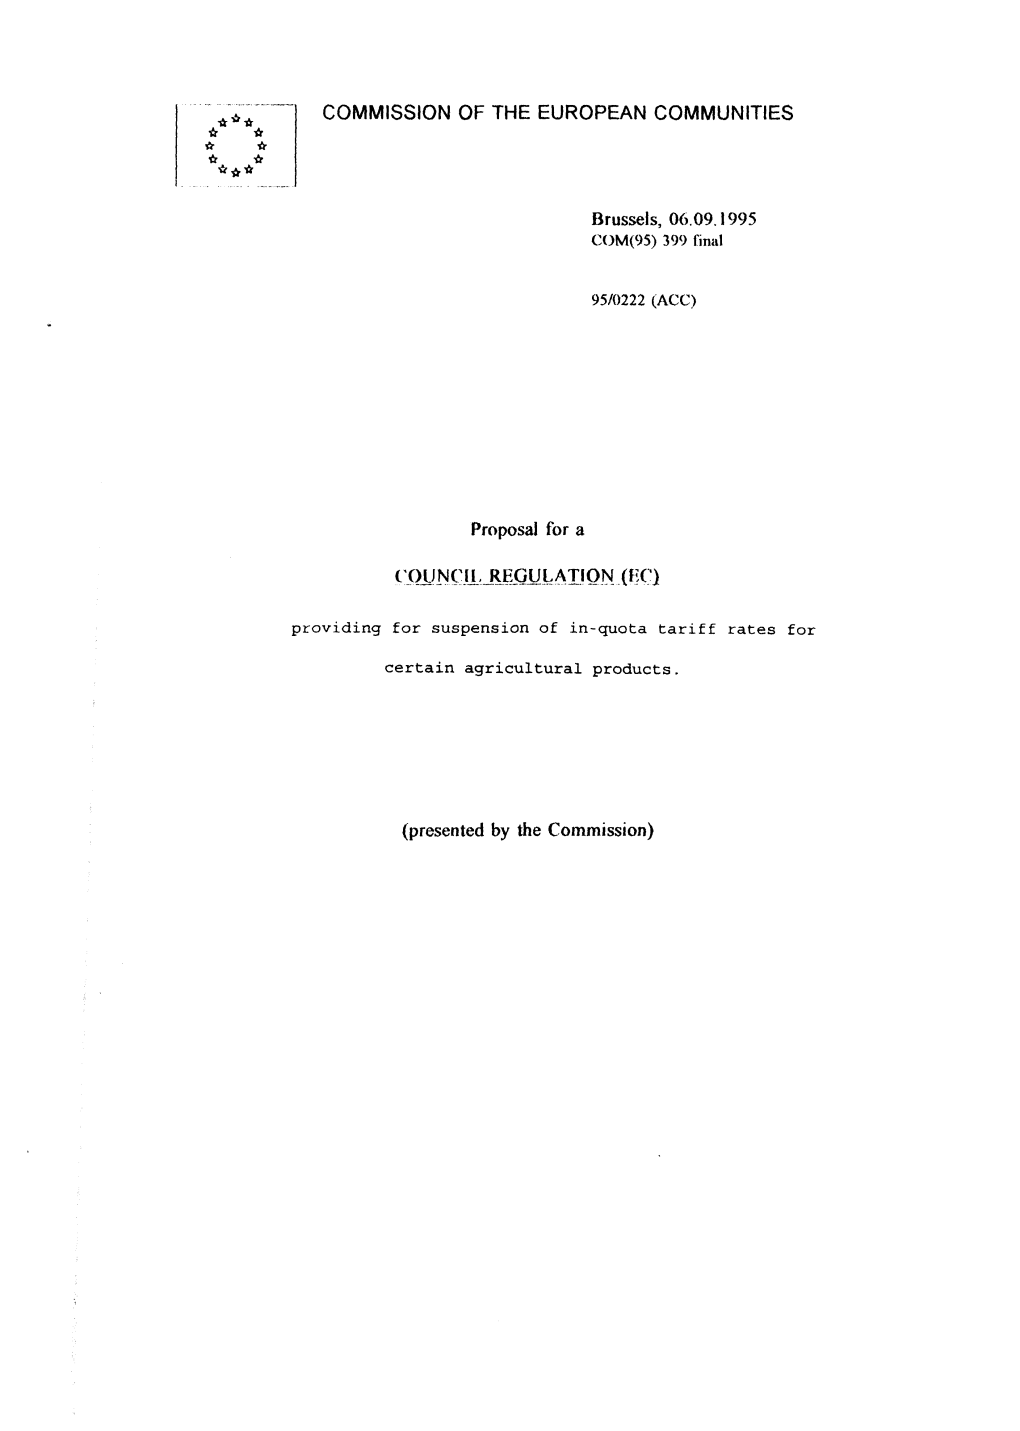 COMMISSION of the EUROPEAN COMMUNITIES Brussels, 06.09.1995 Proposal for a T:Ounçaj^EGULATION (HC) (Presented by the Commission